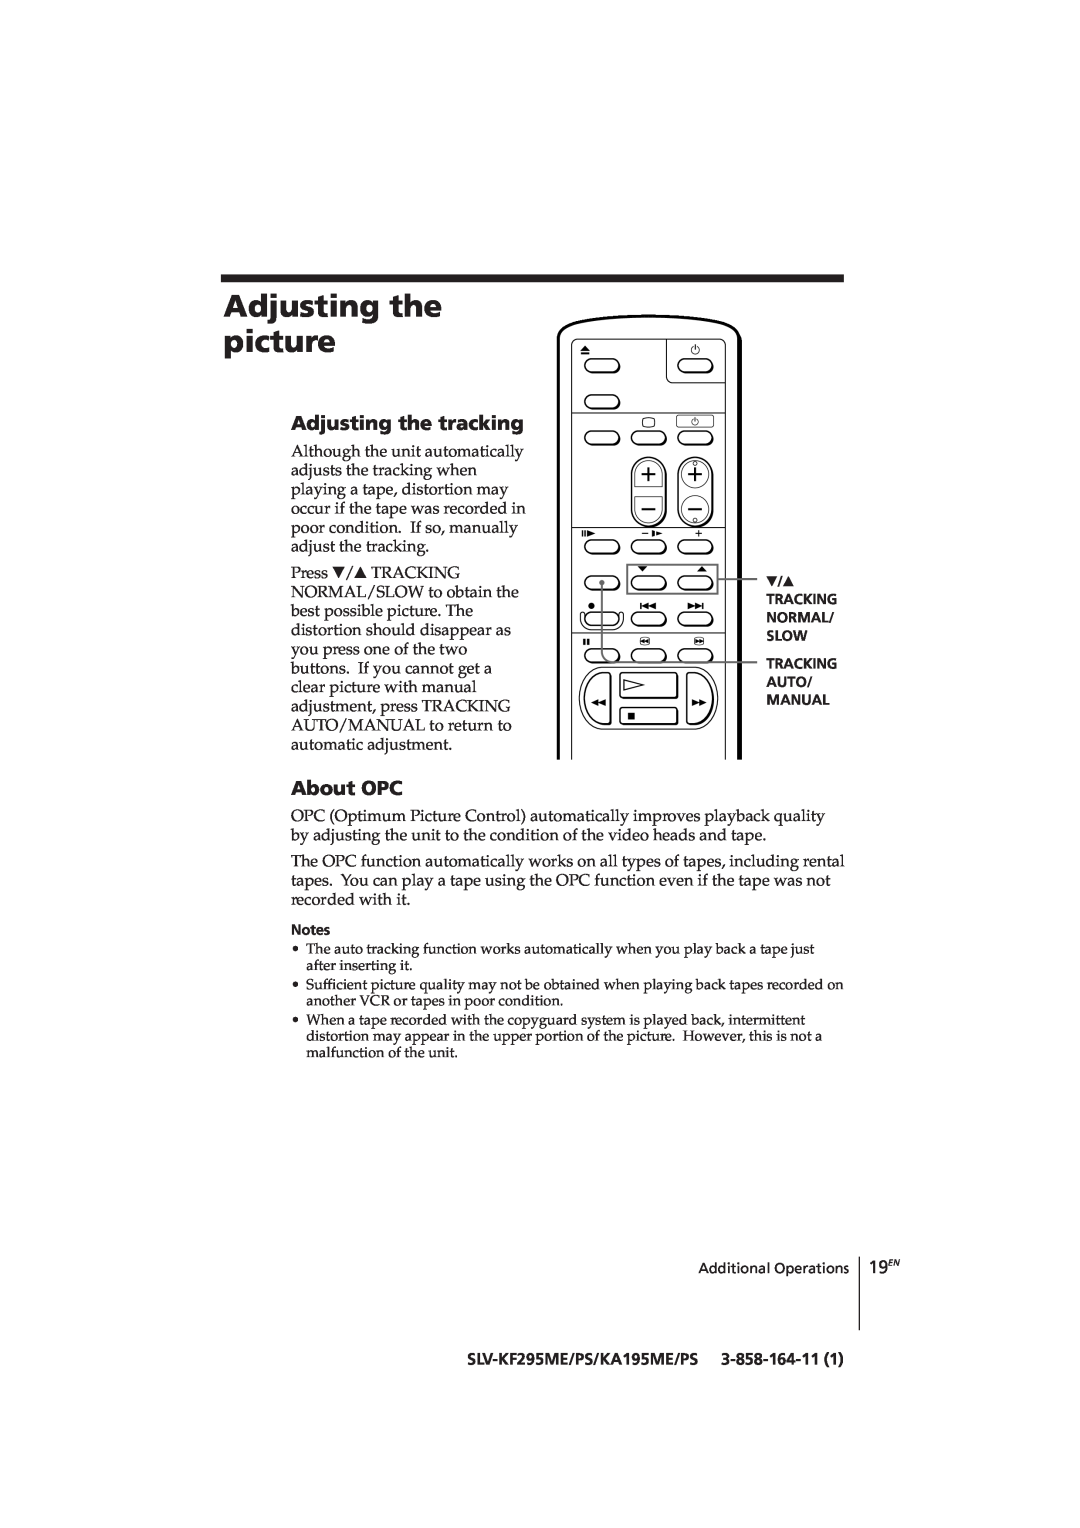 Sony SLV-KA195CH, SLV-KF295CH manual Adjusting the picture, Adjusting the tracking, About OPC, SLV-KF295ME/PS/KA195ME/PS 